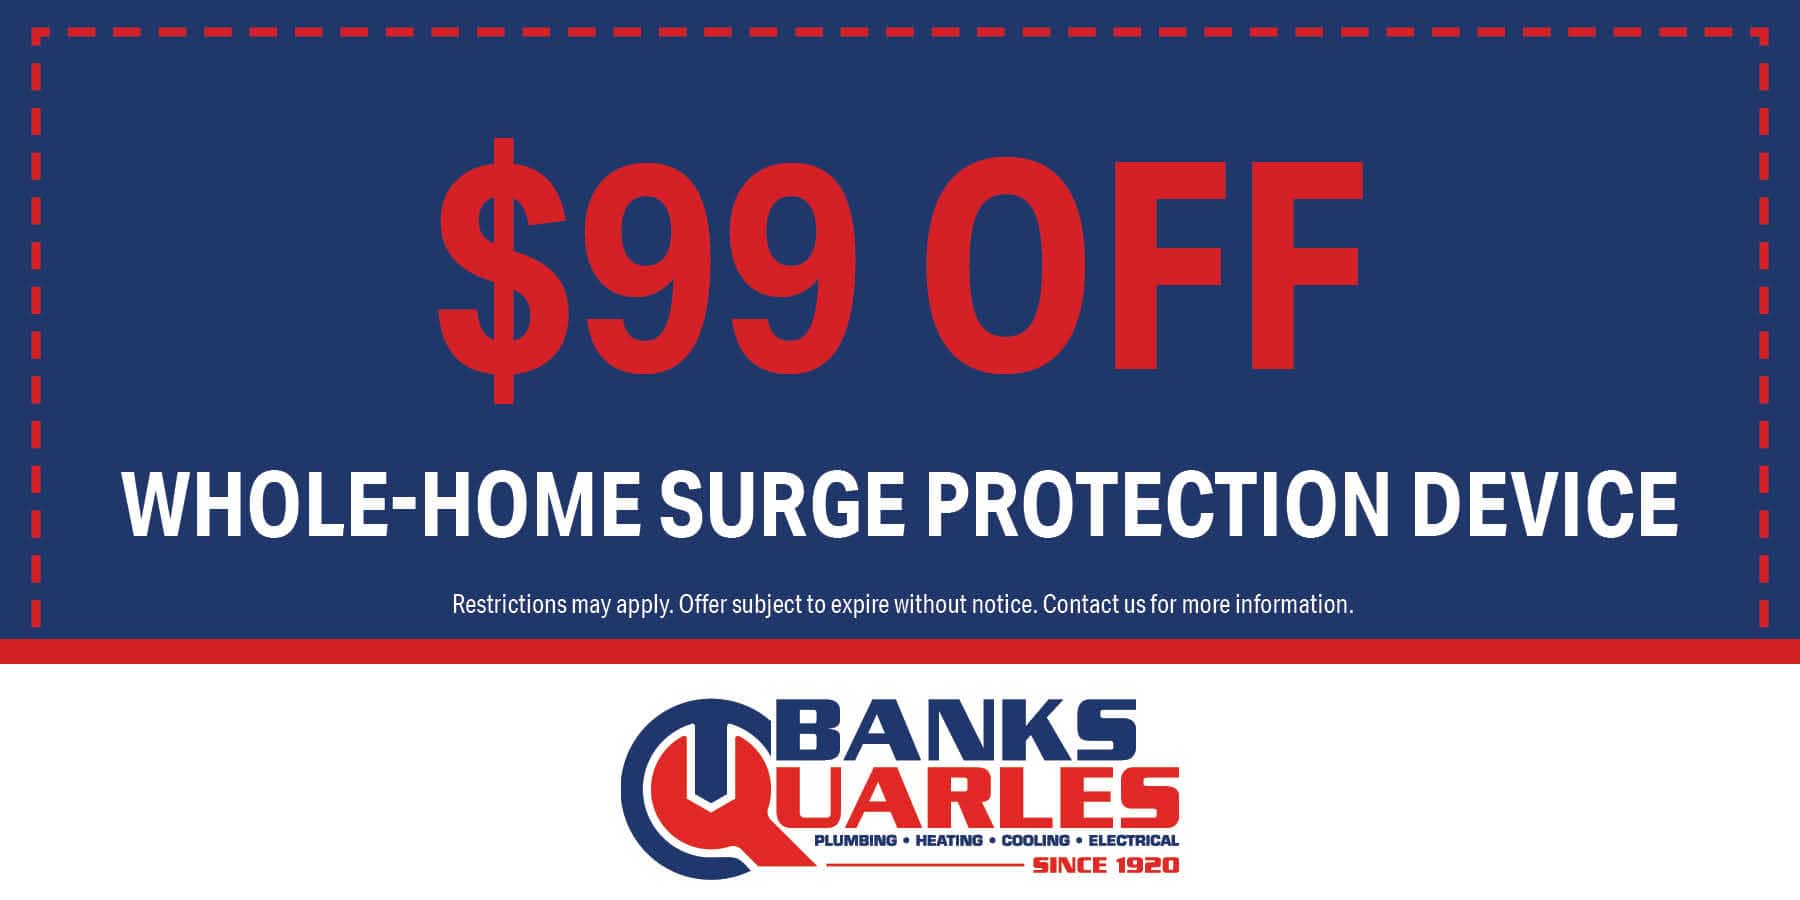  off whole-home surge protection service. Offer subject to expire without warning. Contact us for details.